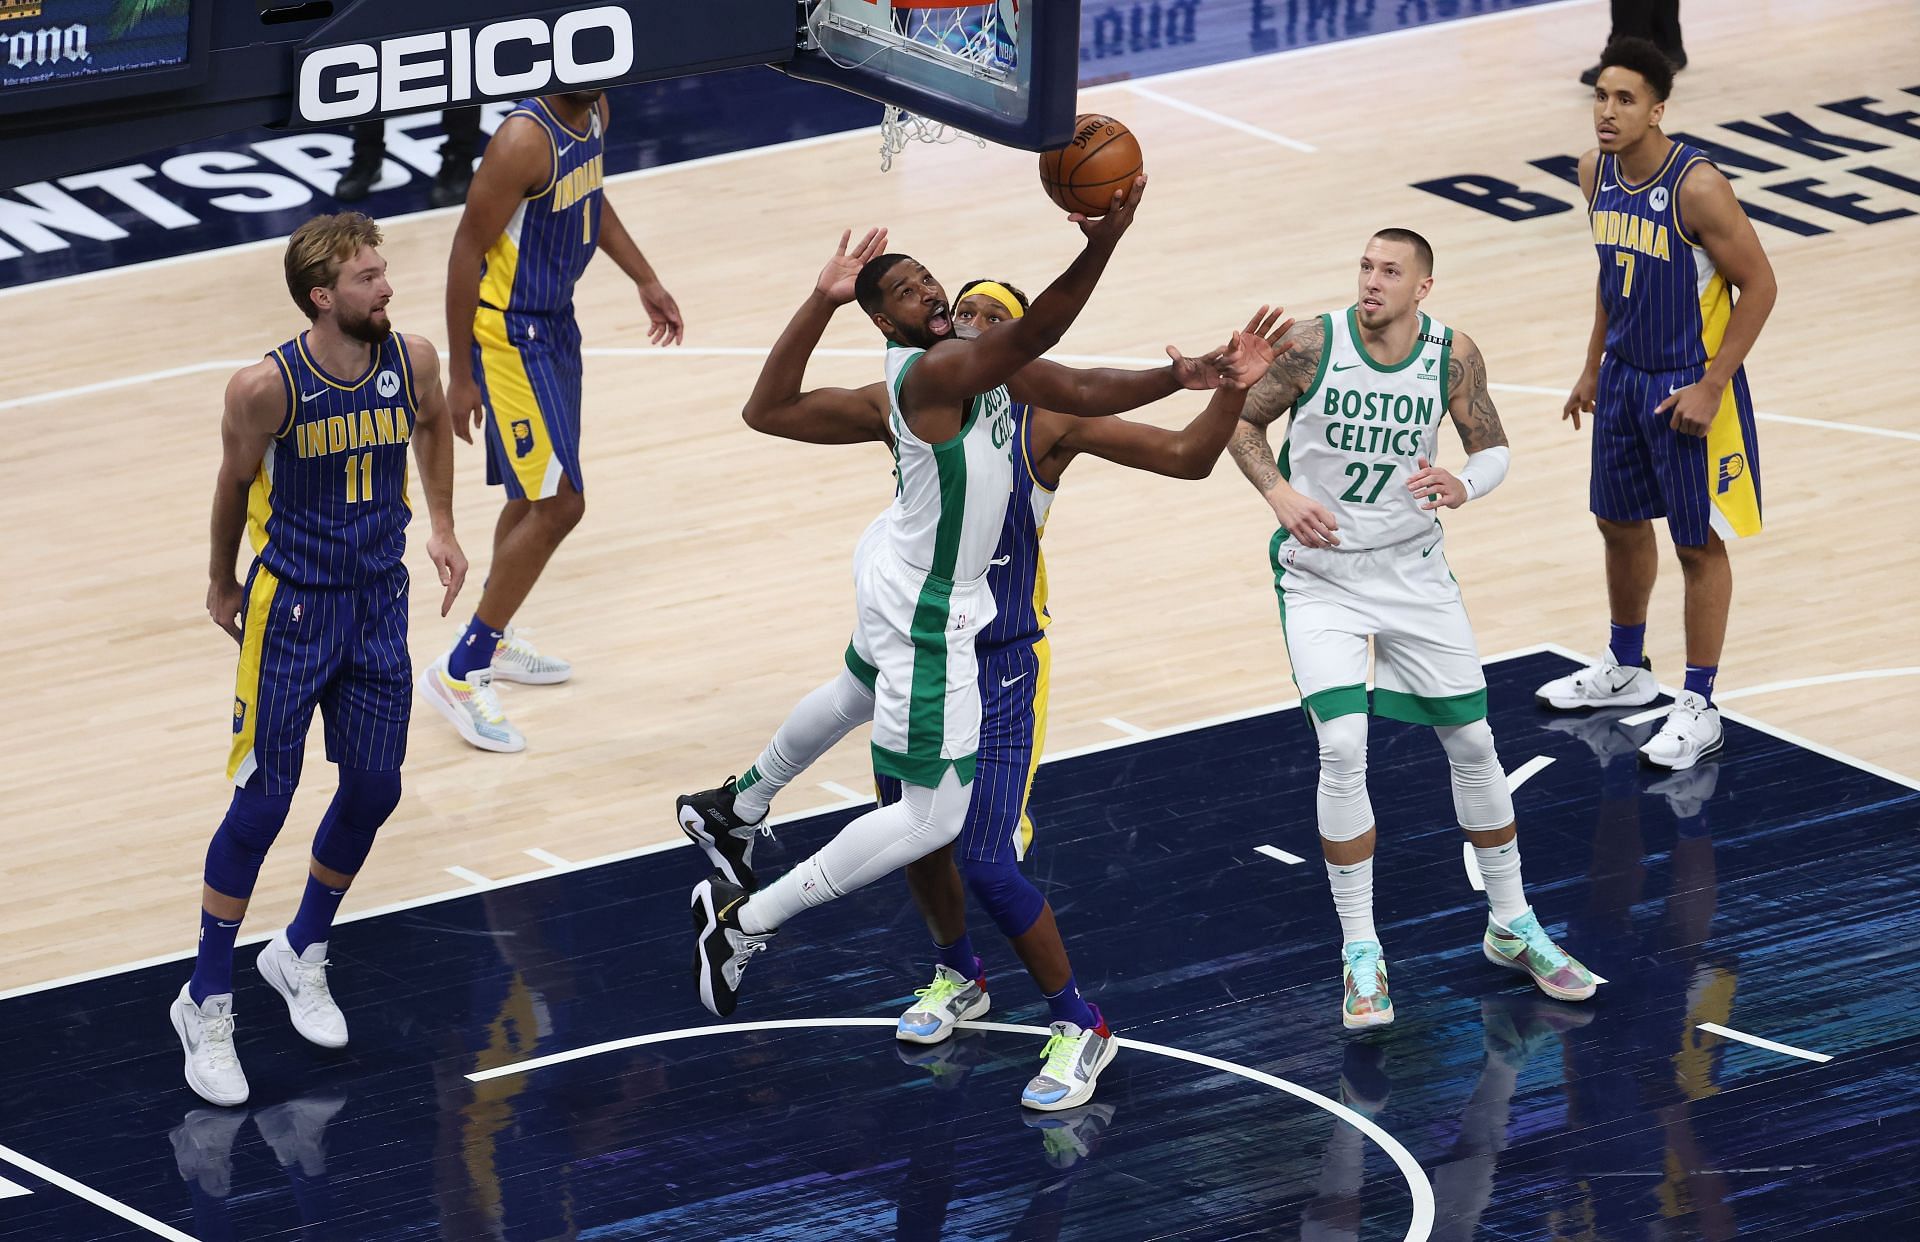 The Indiana Pacers will host the Boston Celtics on January 12th